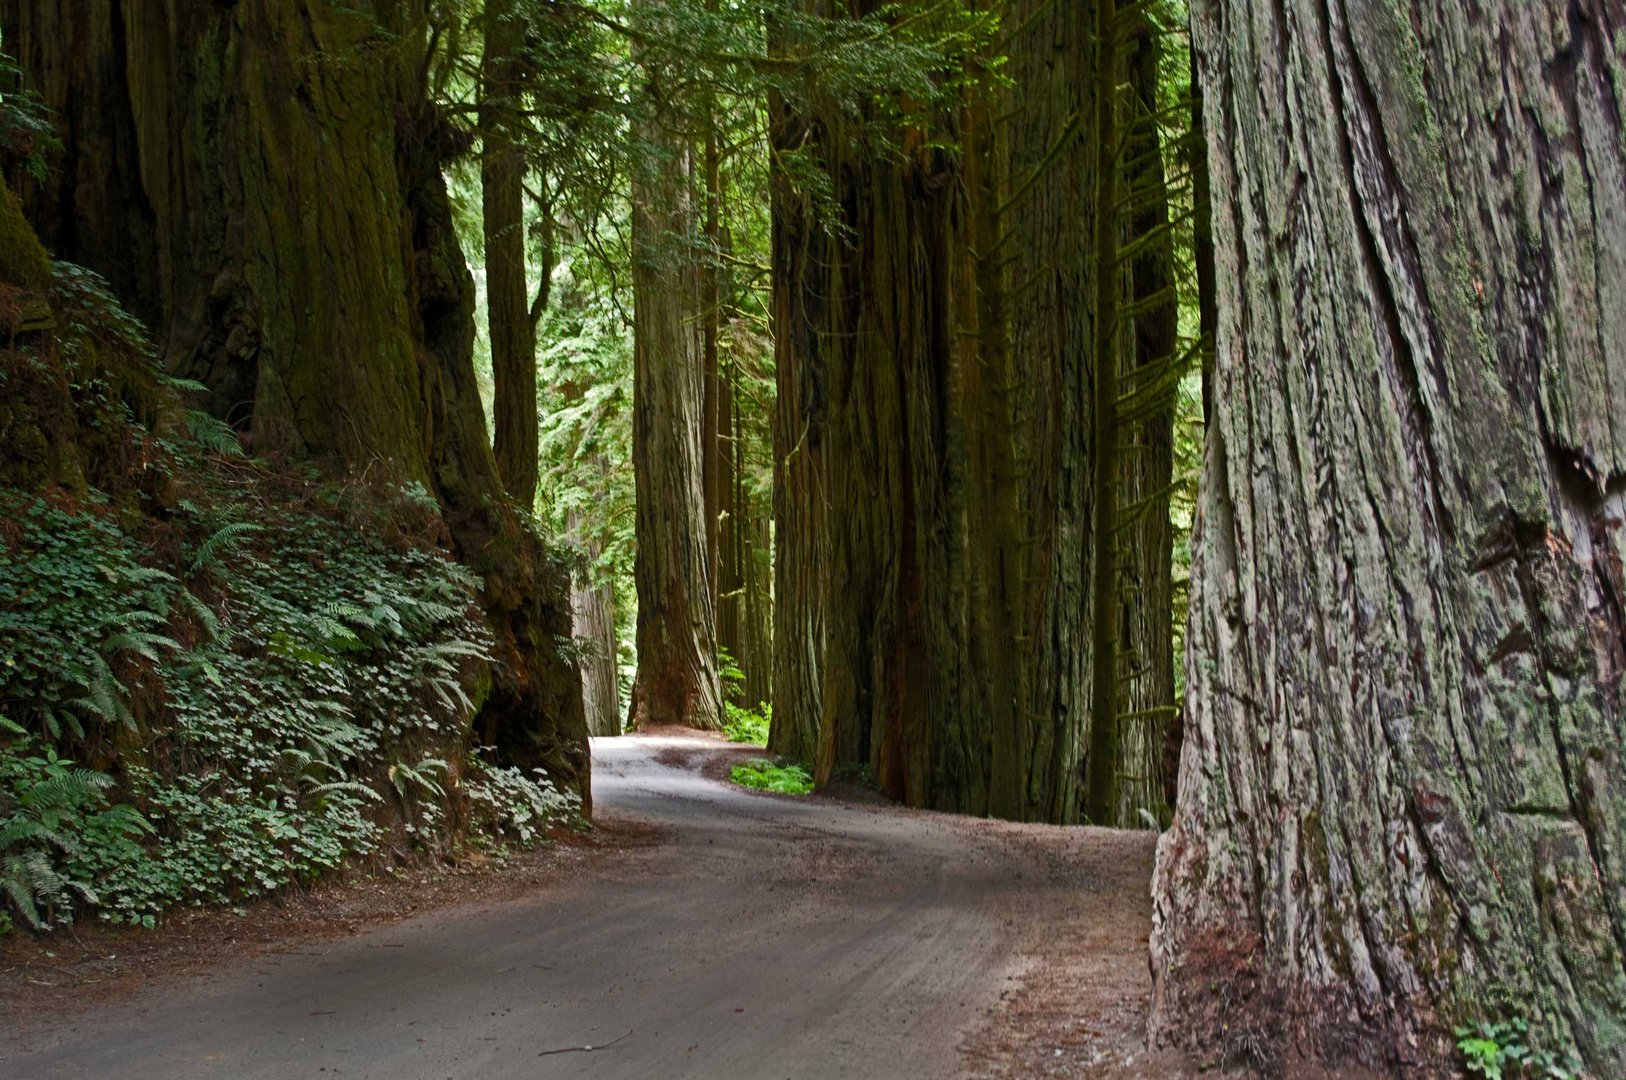 A drive through the redwood forest